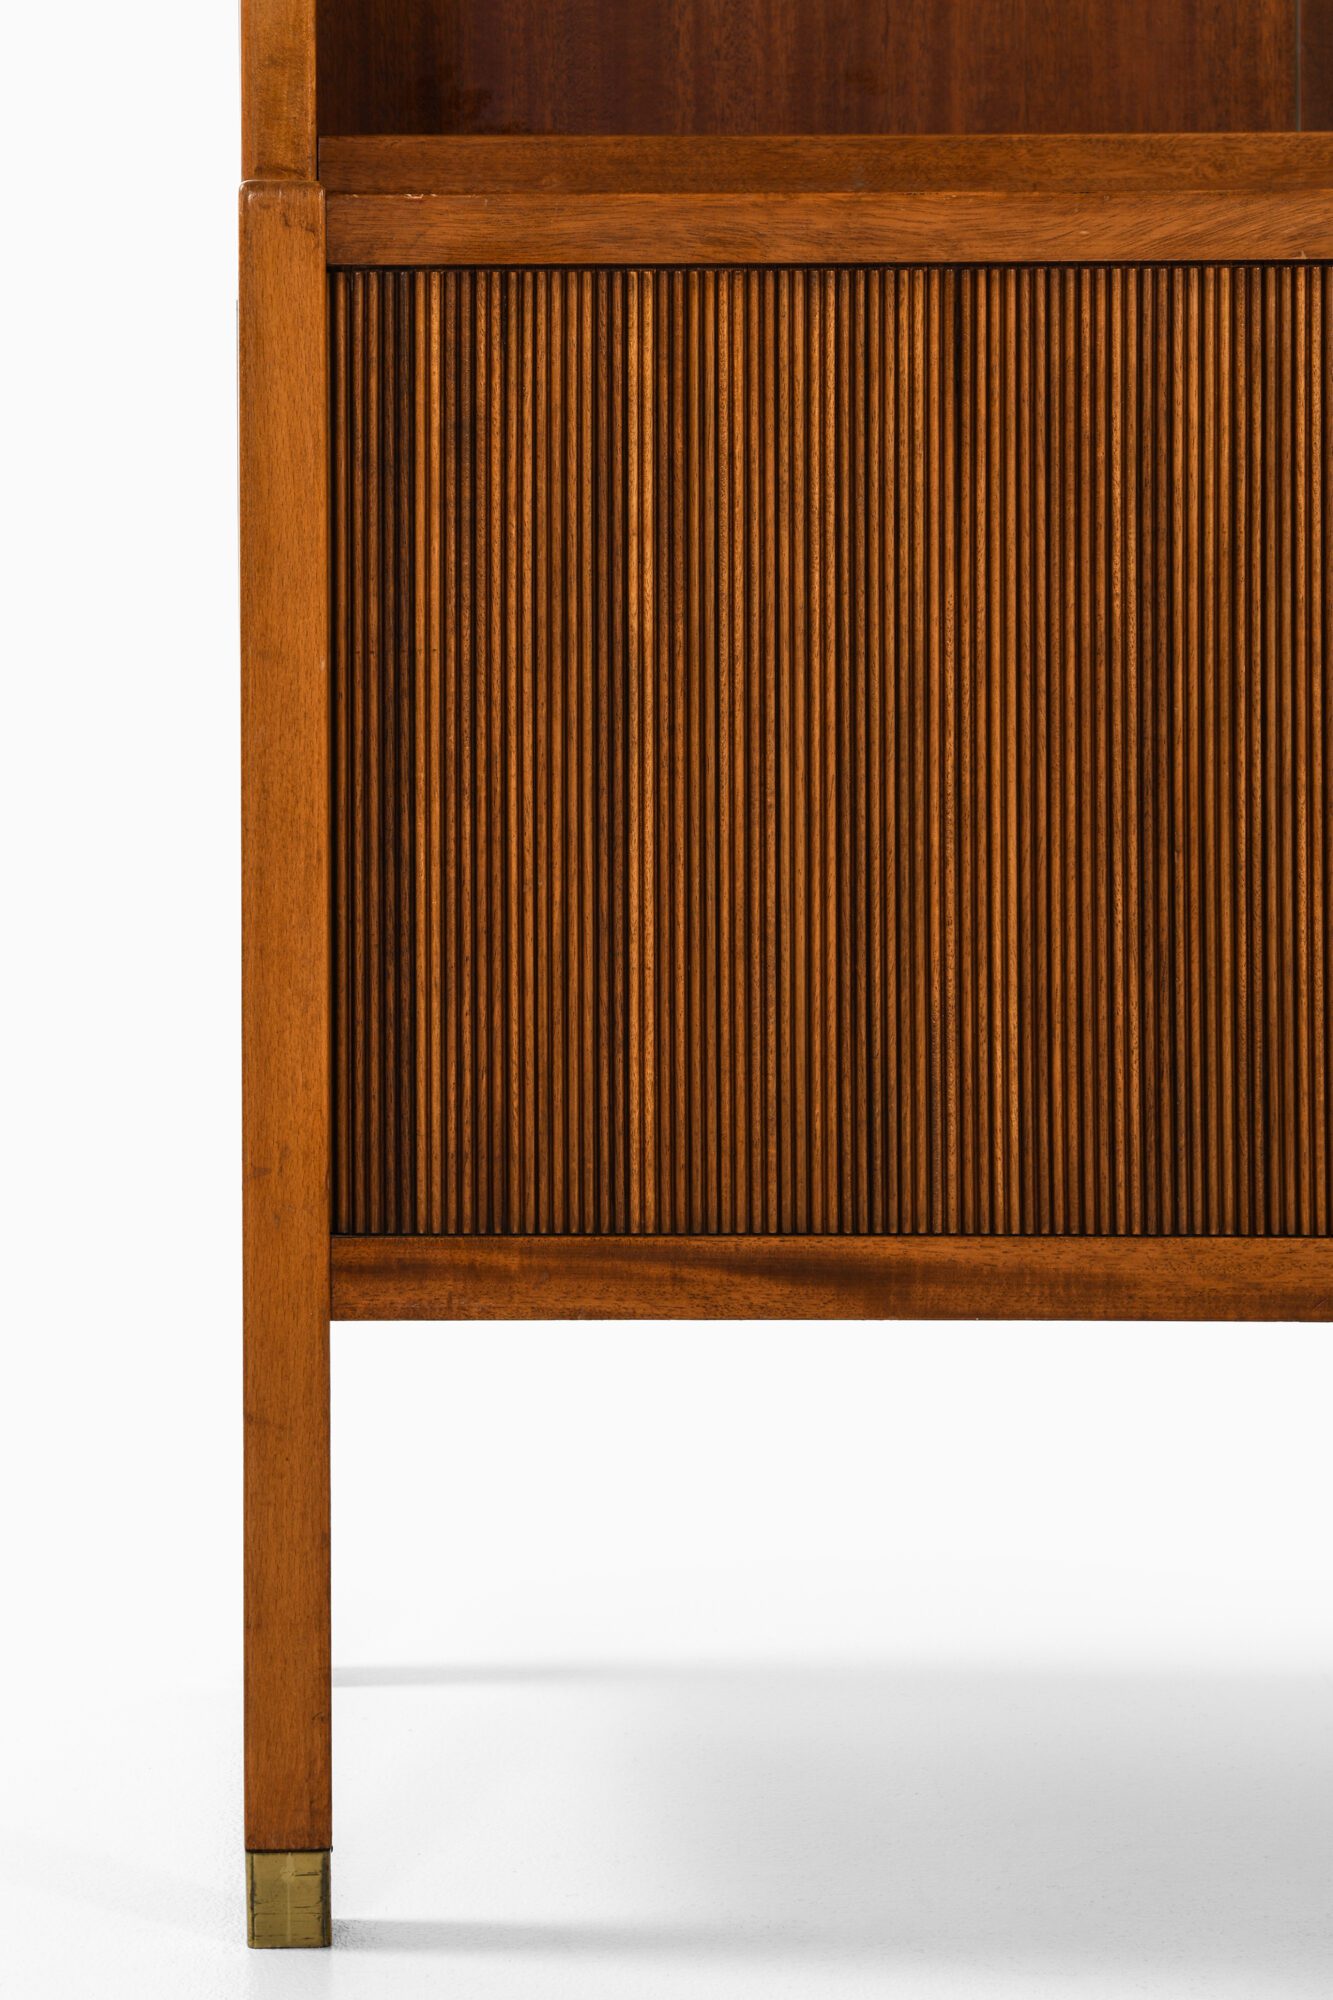 Carl-Axel Acking cabinets in walnut and brass at Studio Schalling